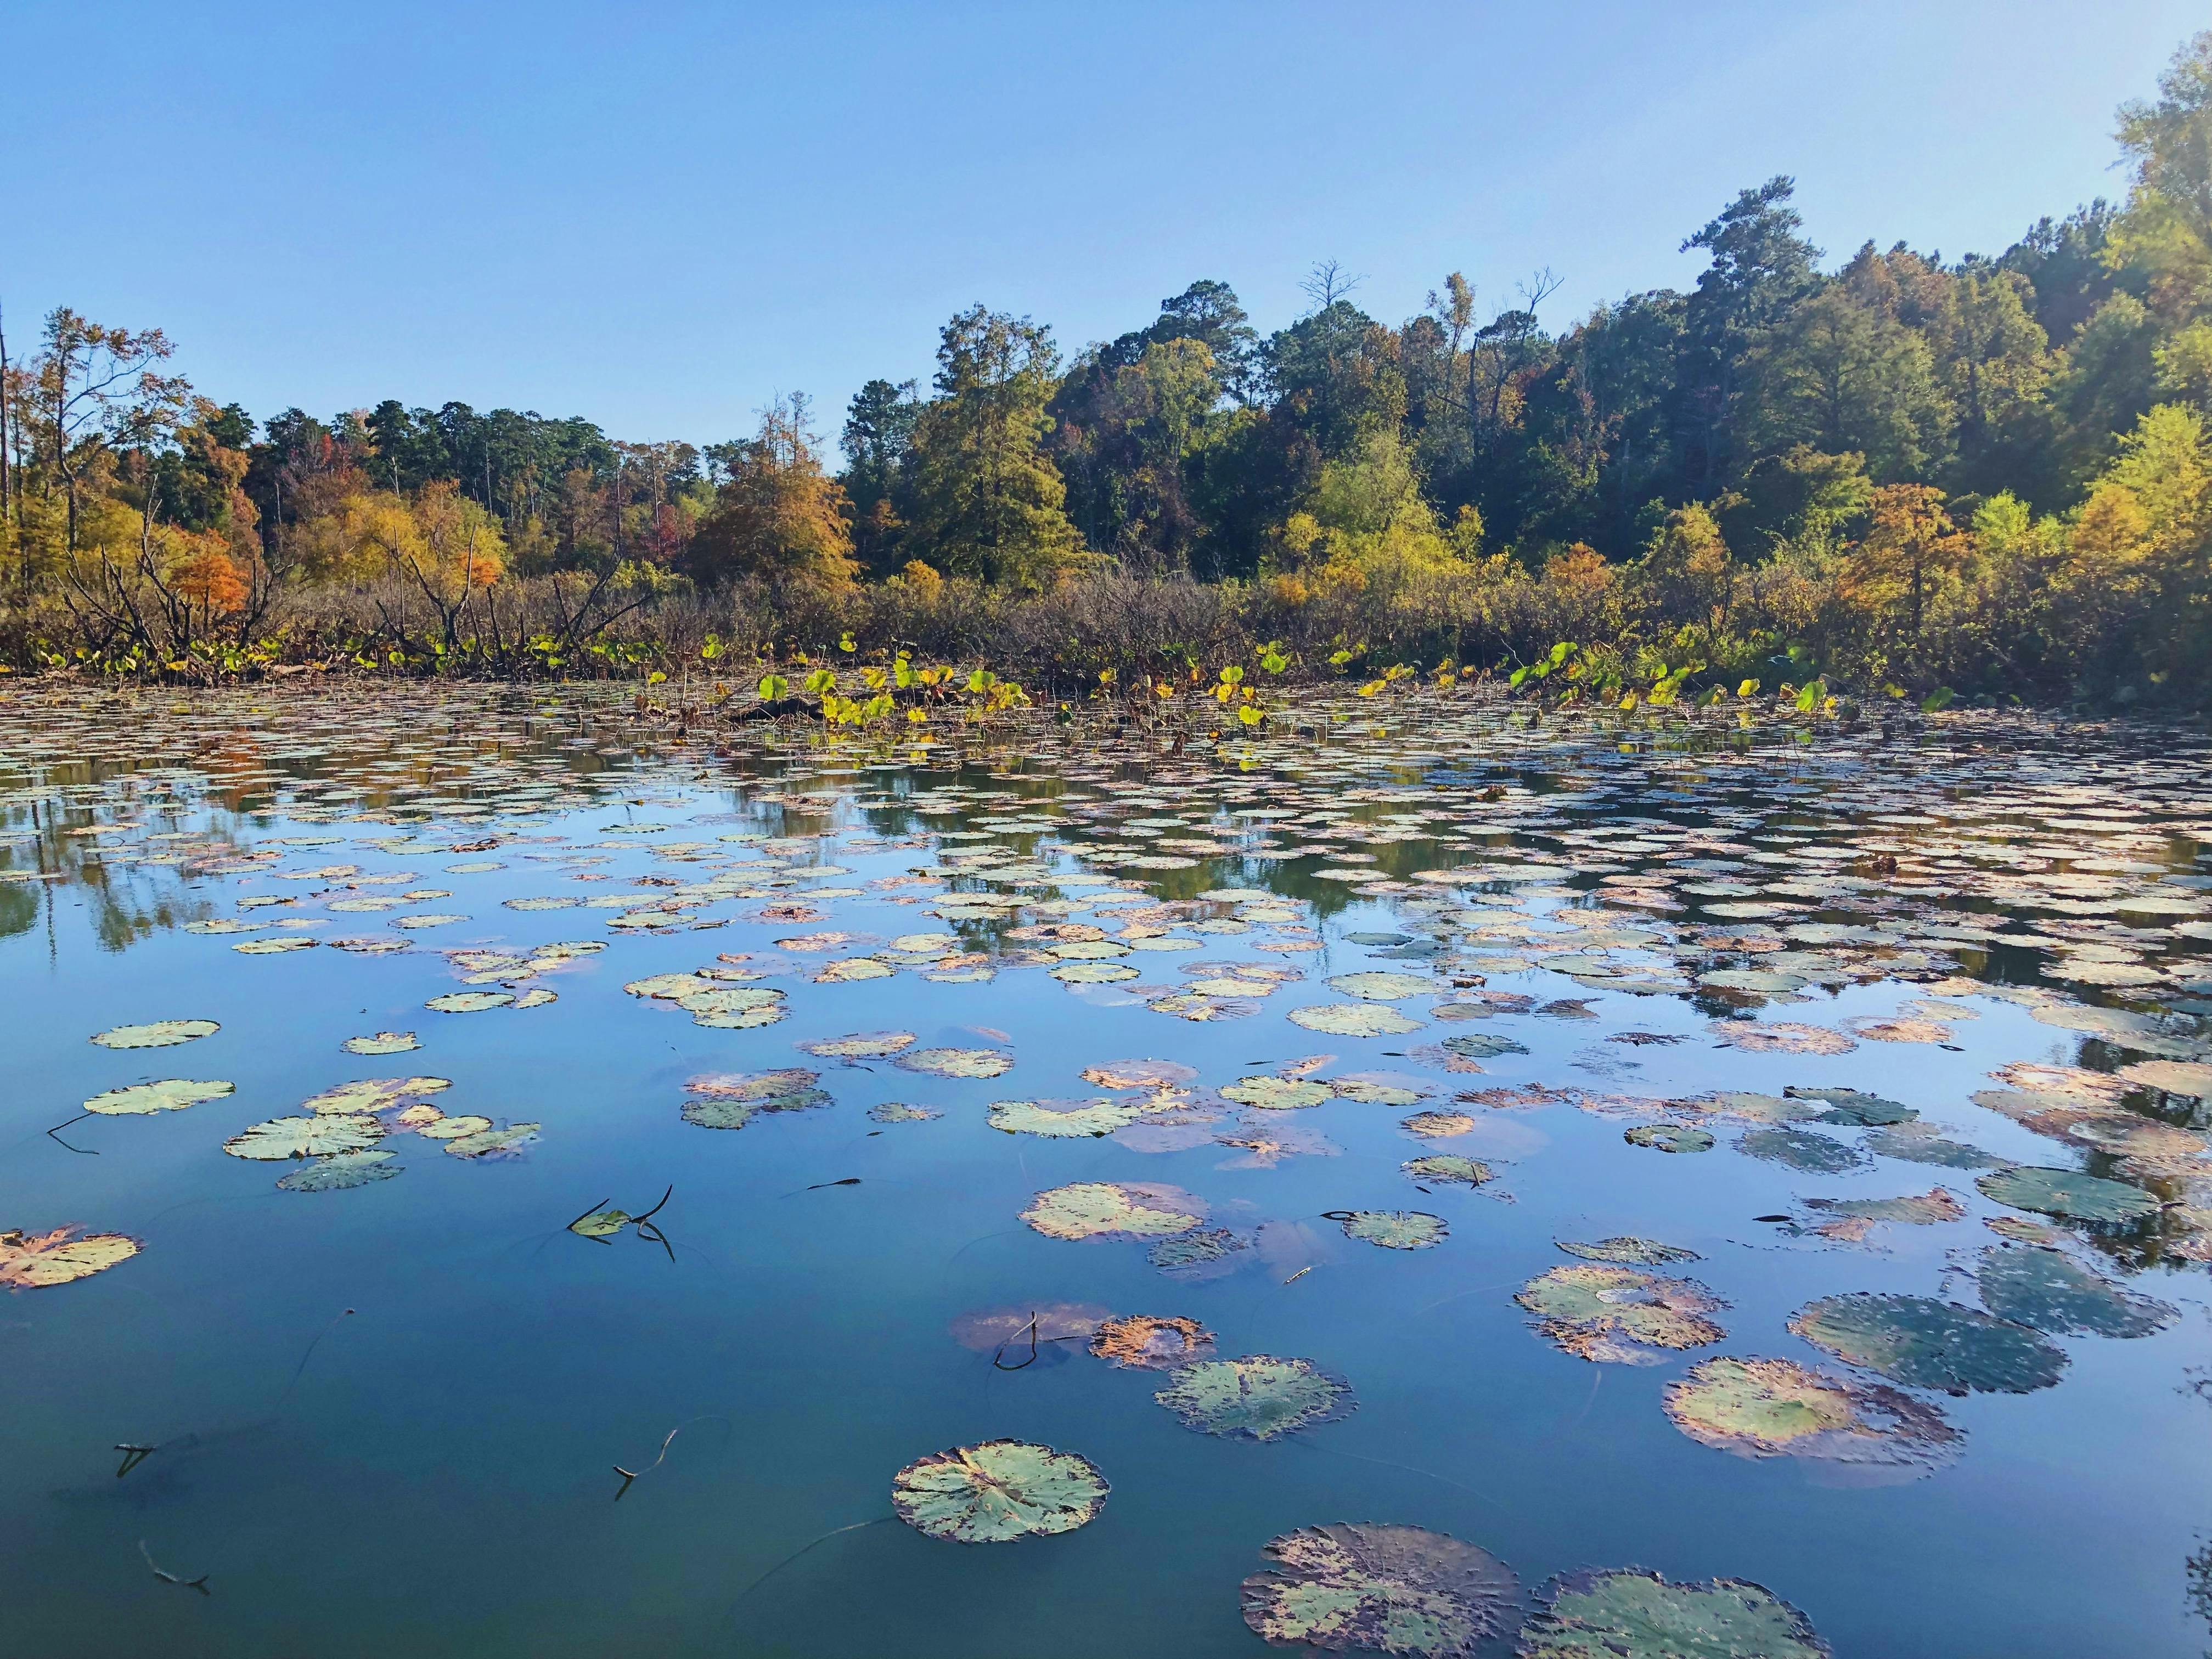 An image of a lilypad-covered pond.